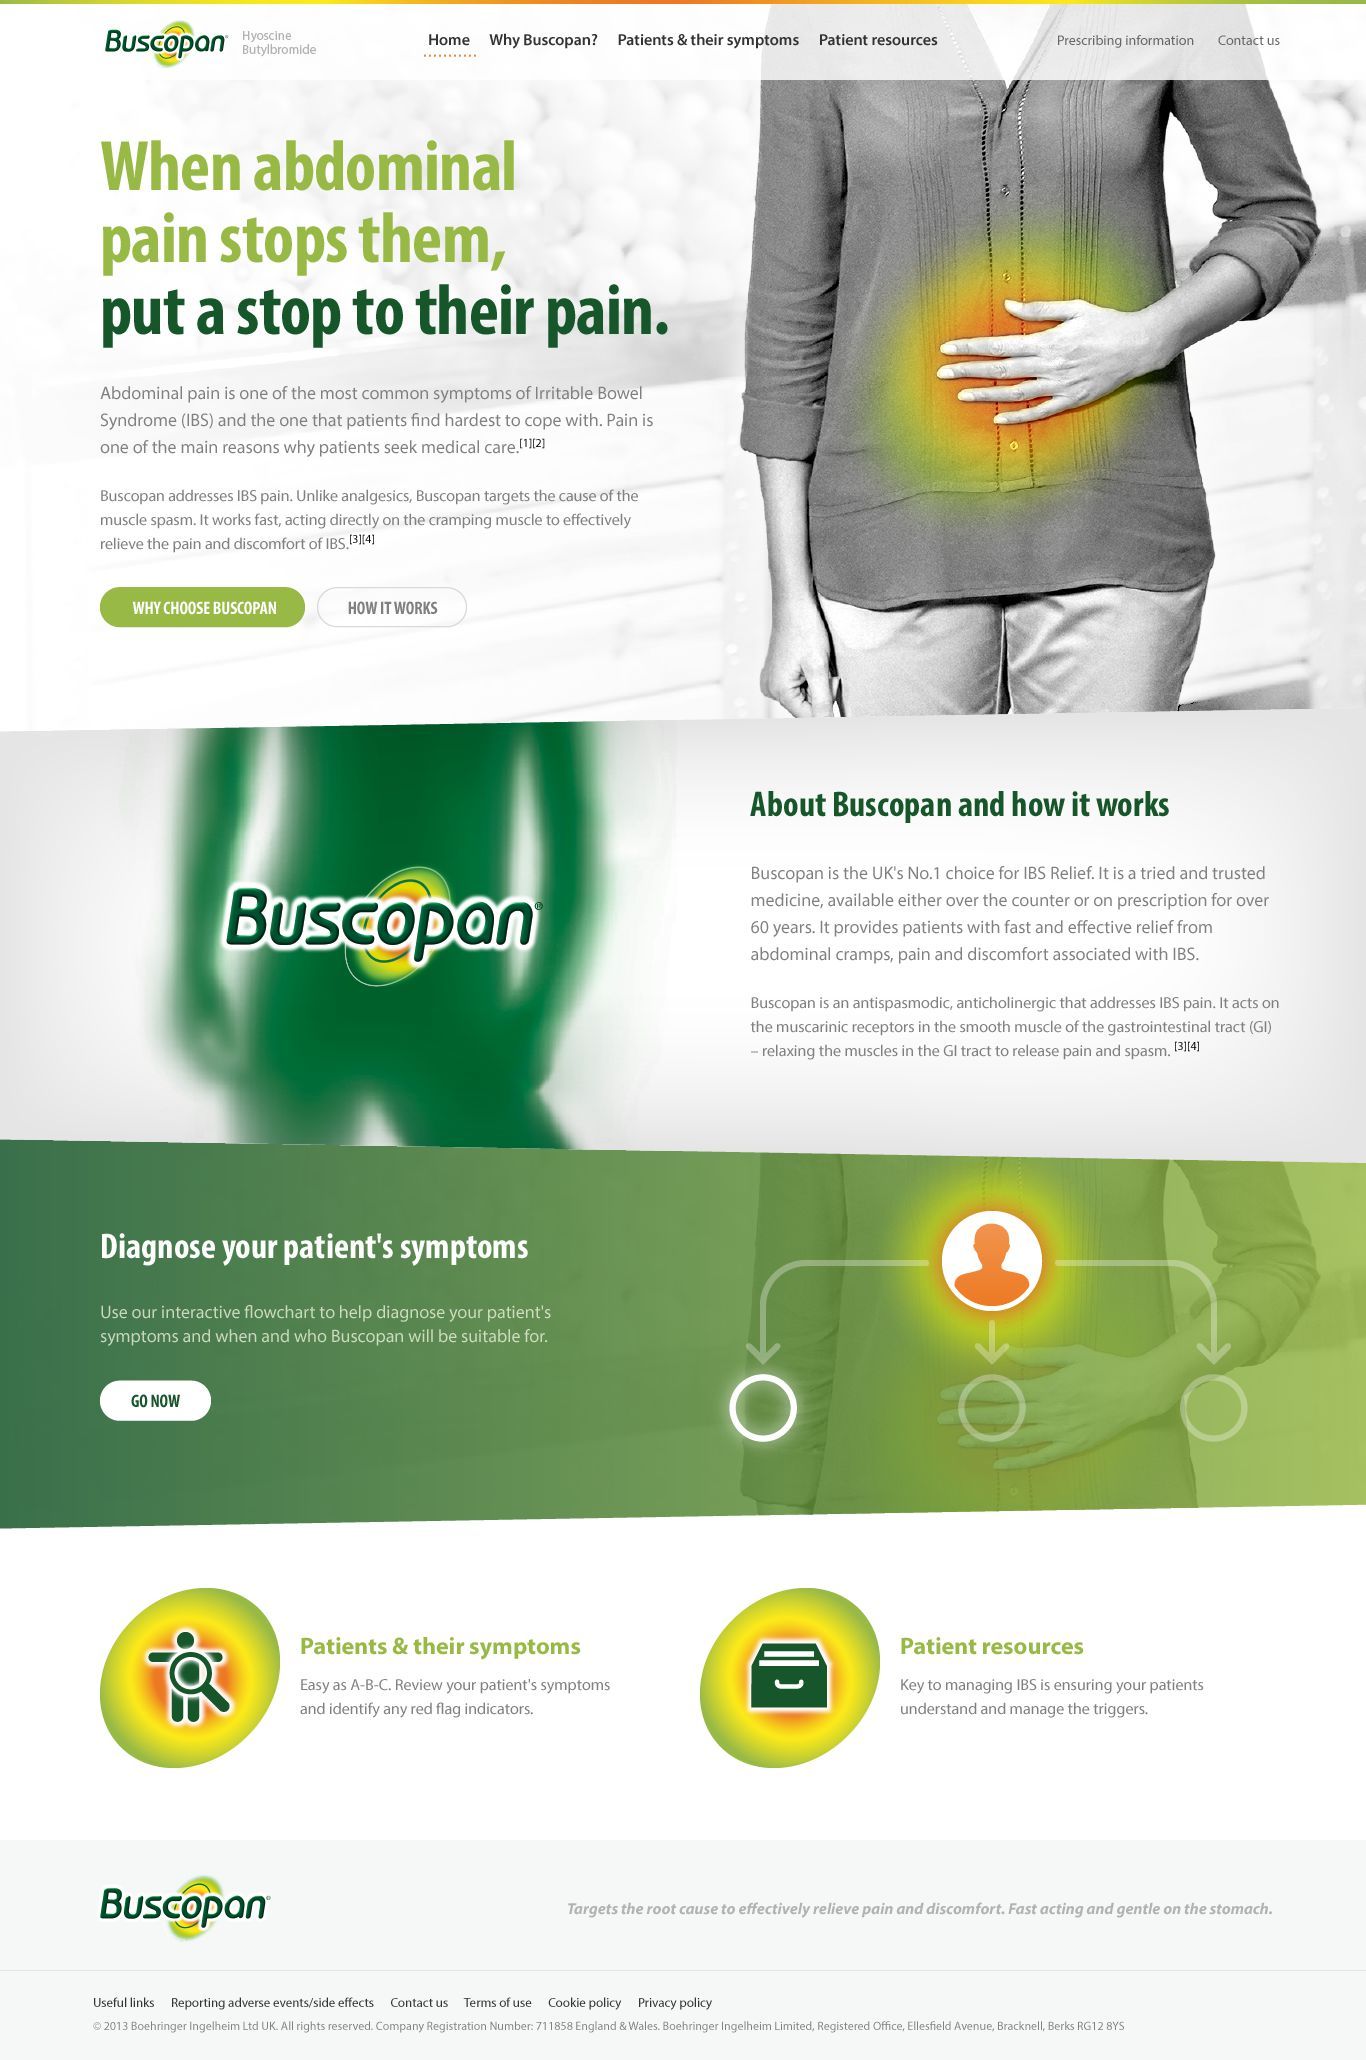 Digital design of the home page